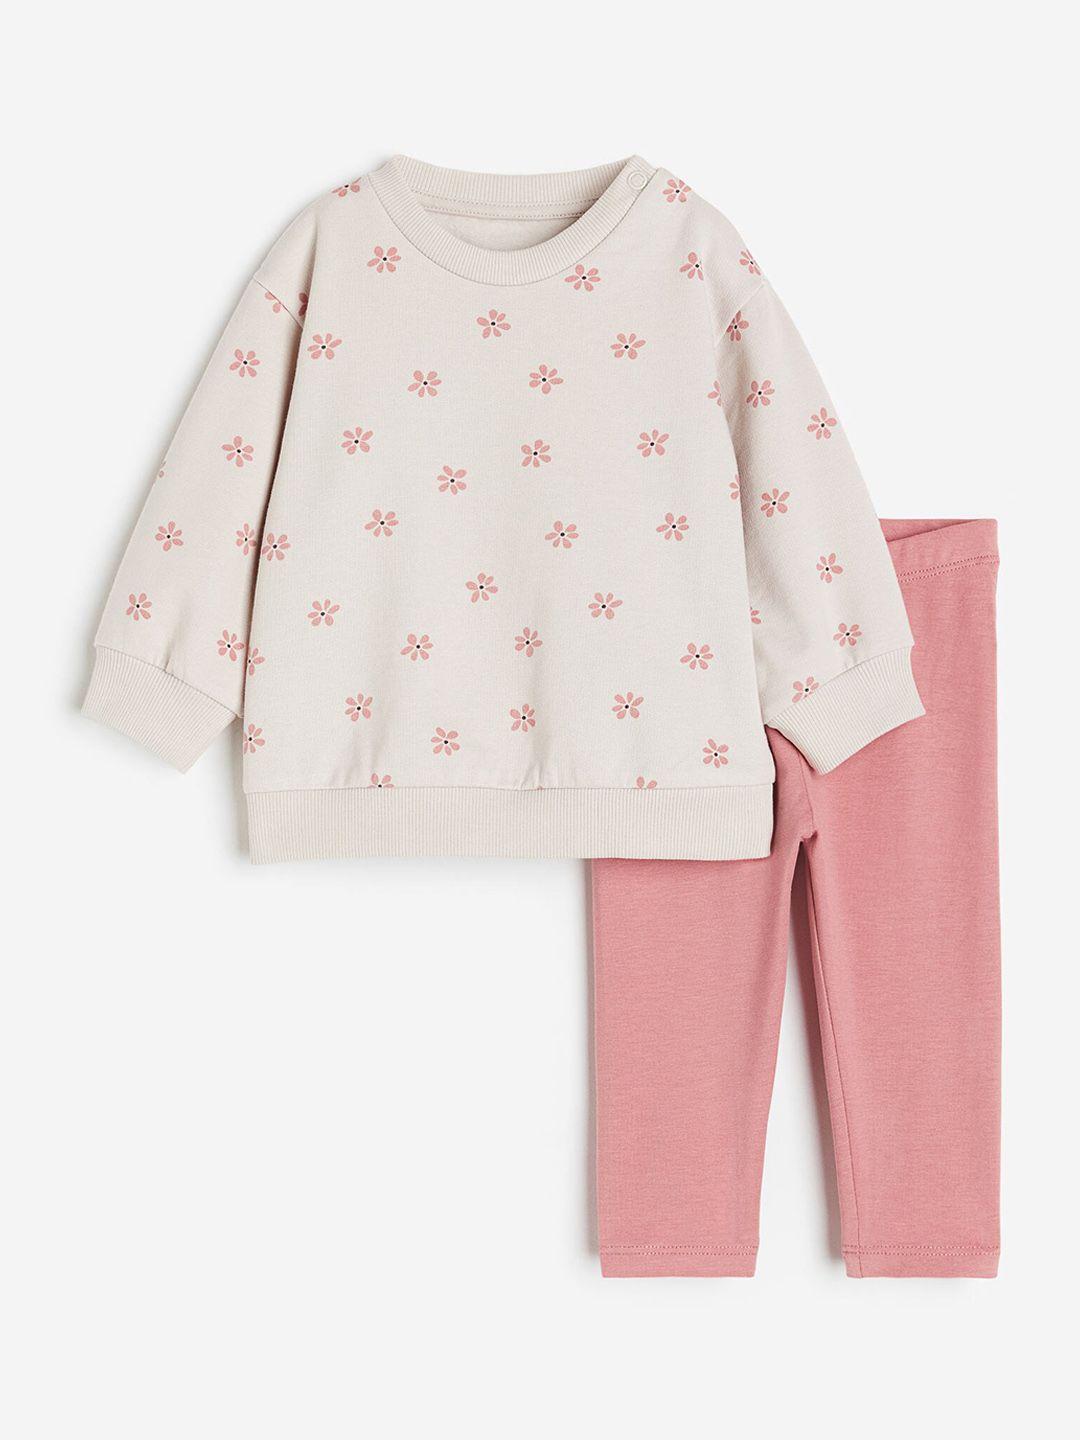 h&m boys pink printed top with trousers